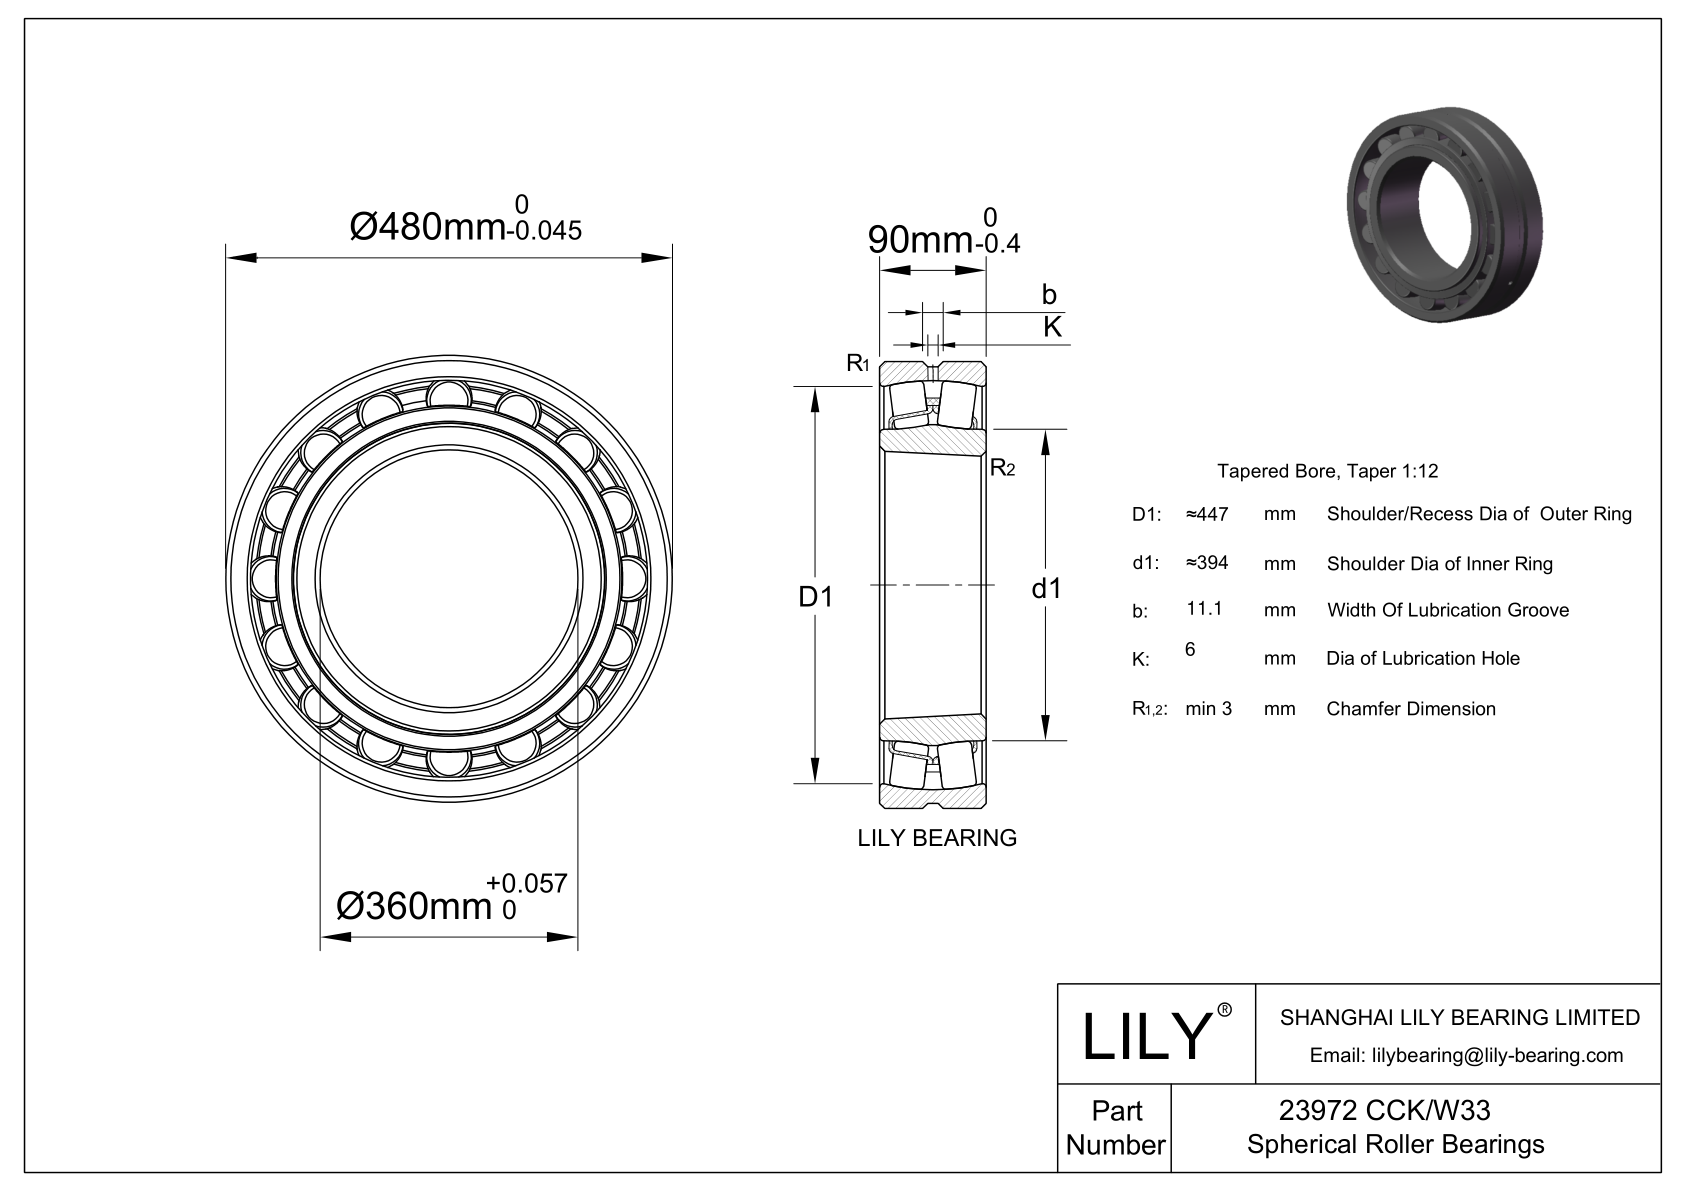 23972 CCK/W33 Double Row Spherical Roller Bearing cad drawing